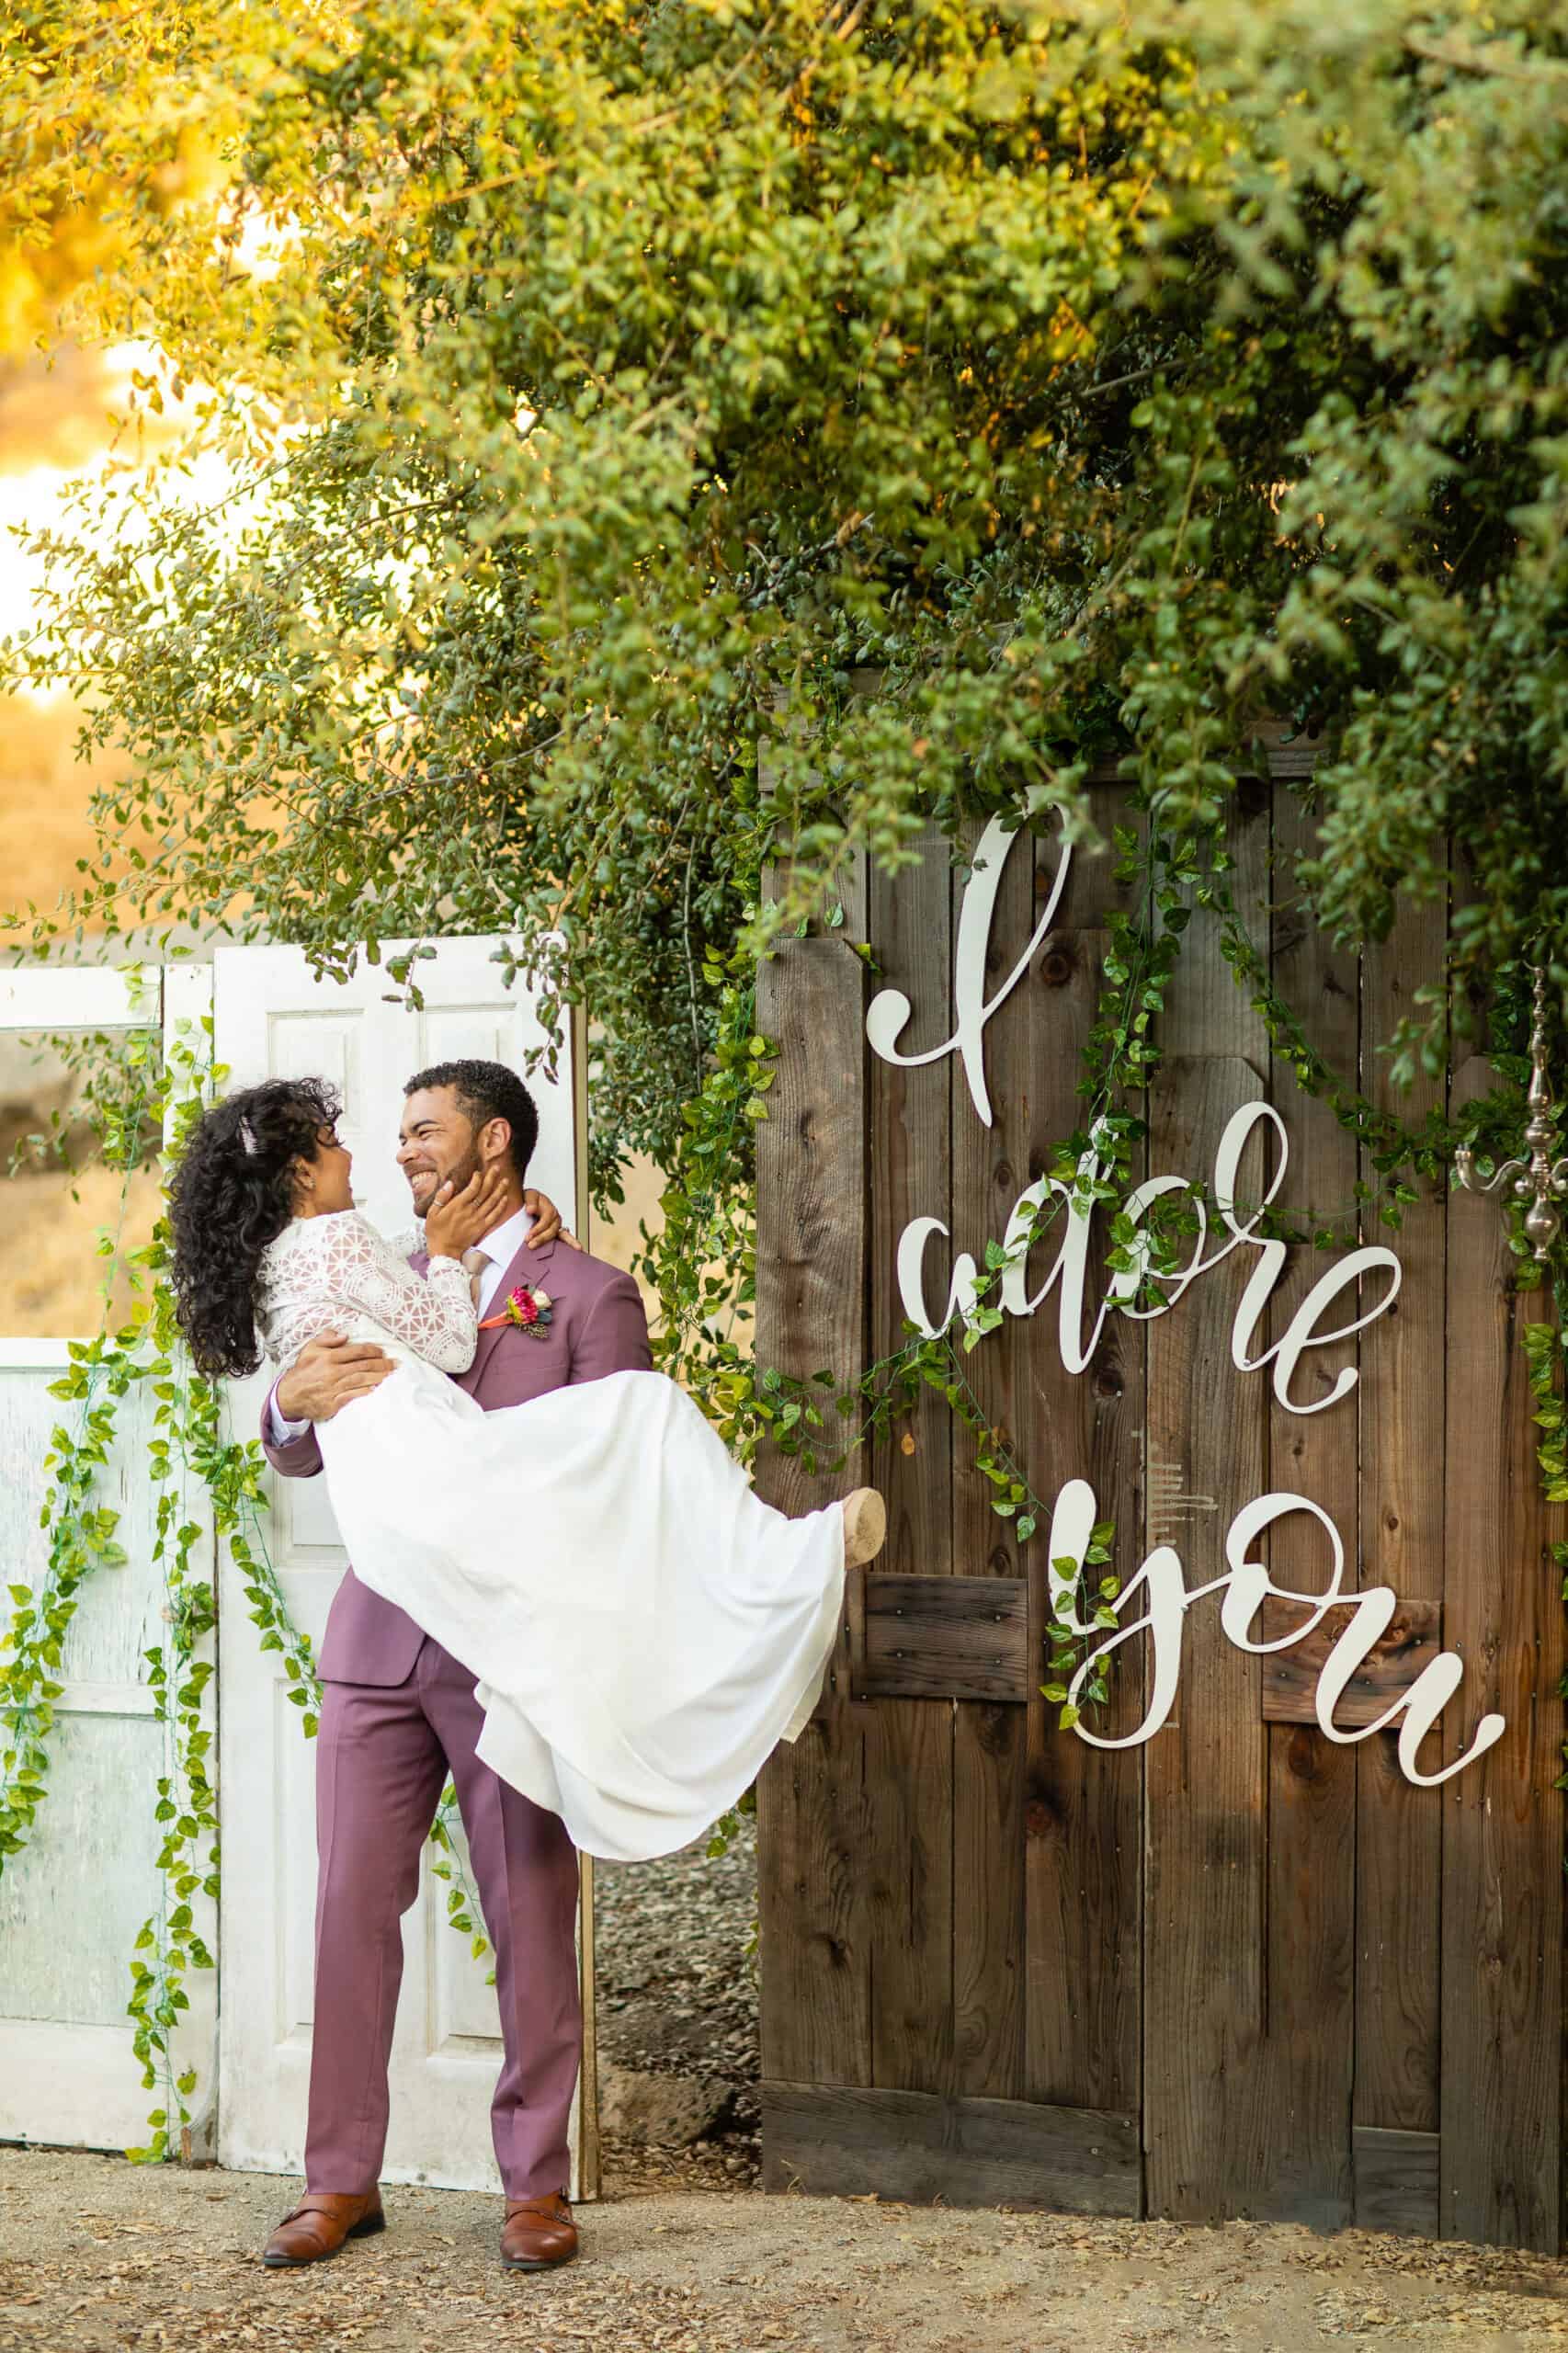 A bride and groom at Winter White Barn in Temecula, CA.